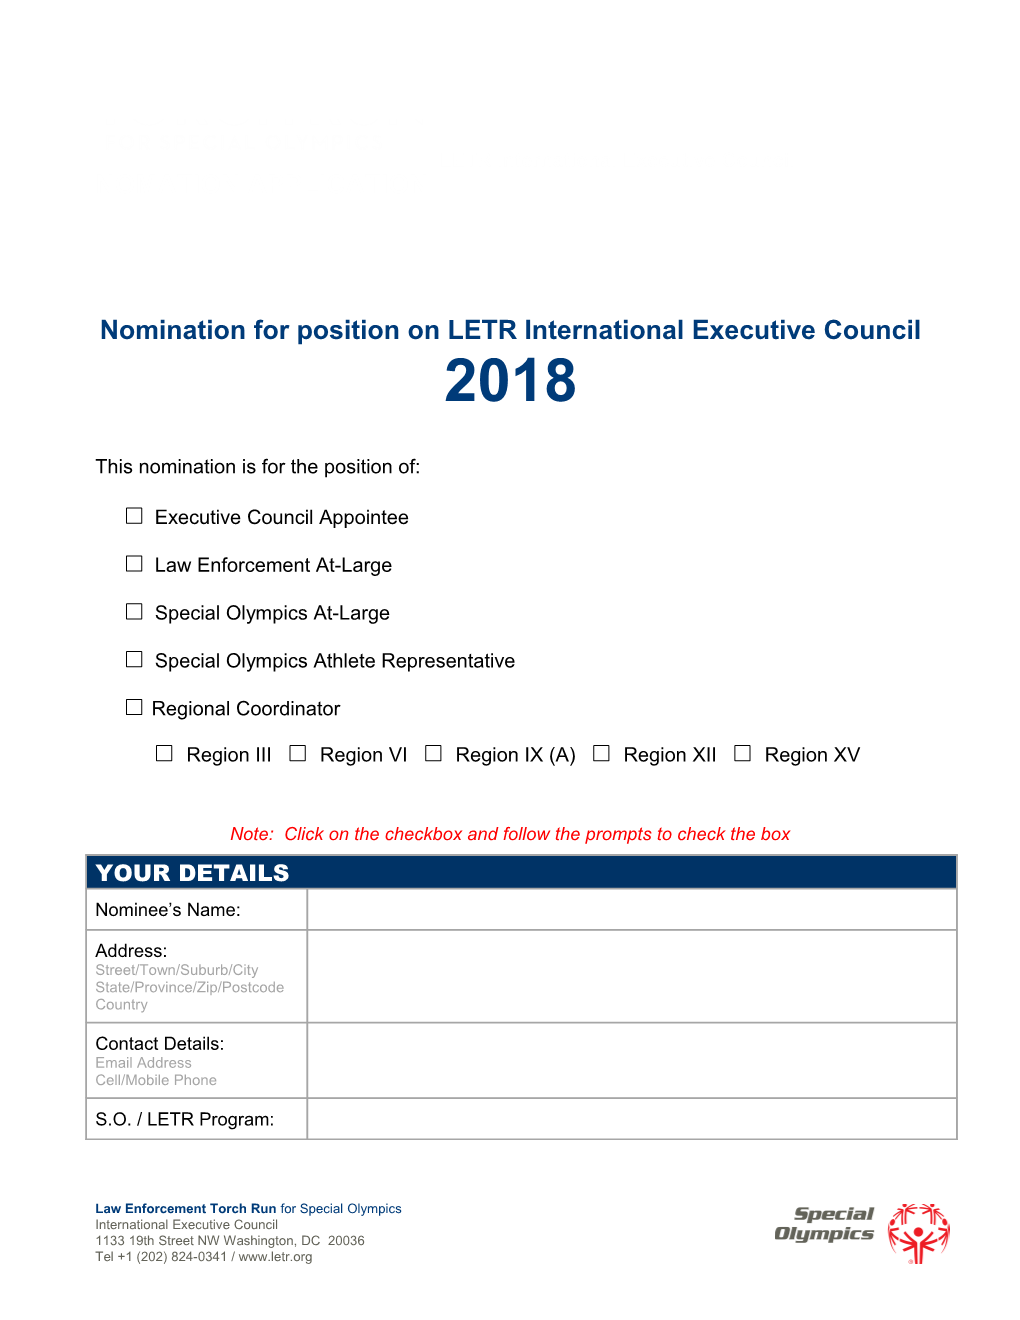 Nomination for Position on LETR International Executive Council